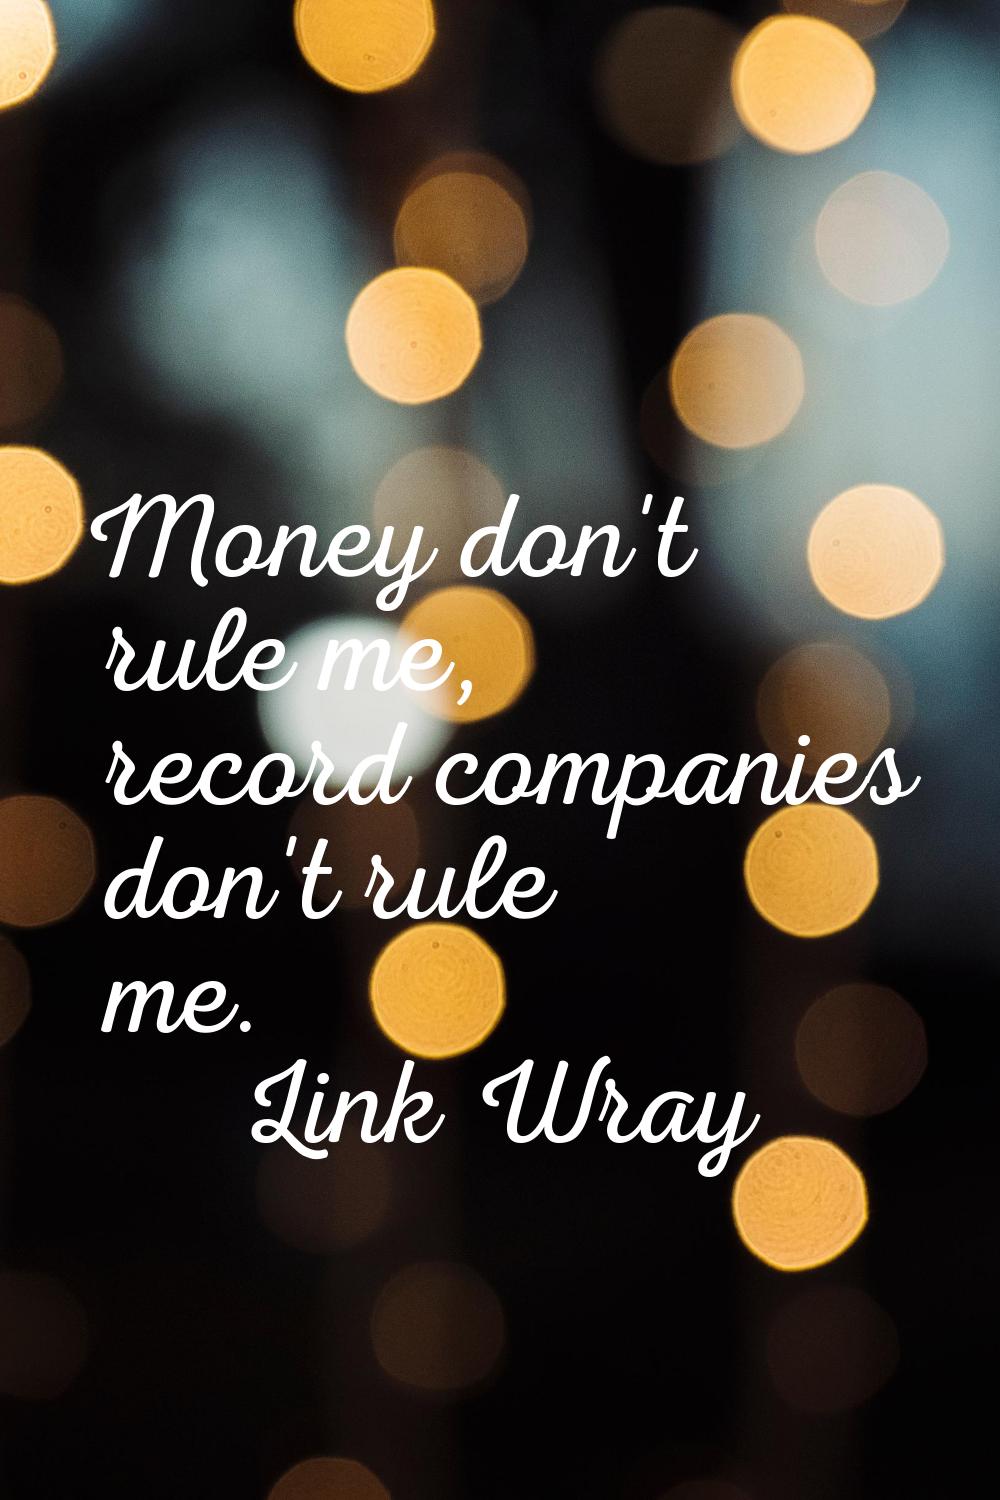 Money don't rule me, record companies don't rule me.